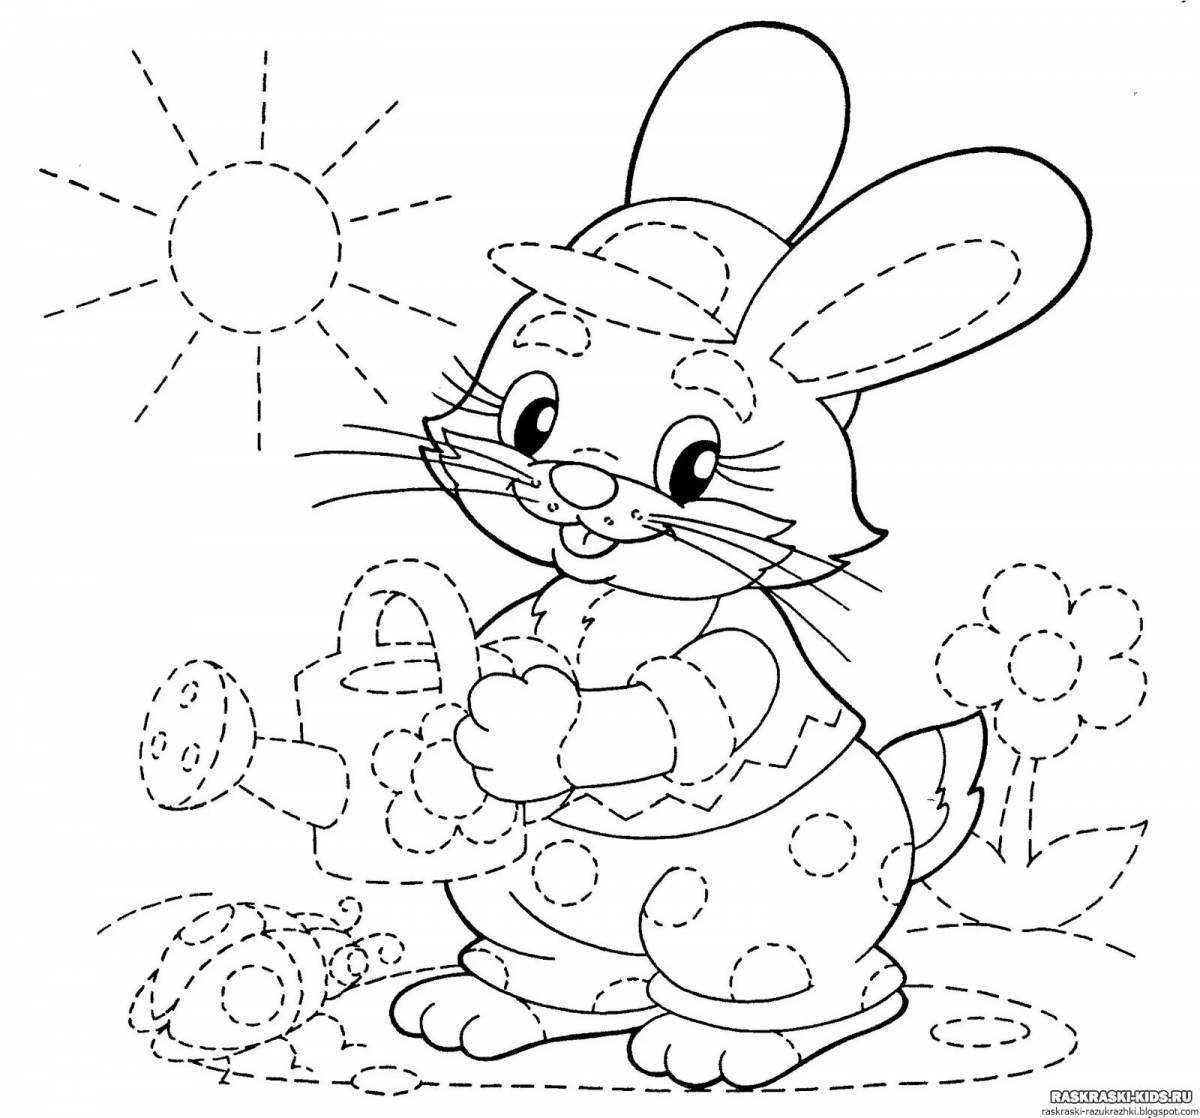 Explosion coloring book for preschoolers 4-5 years old